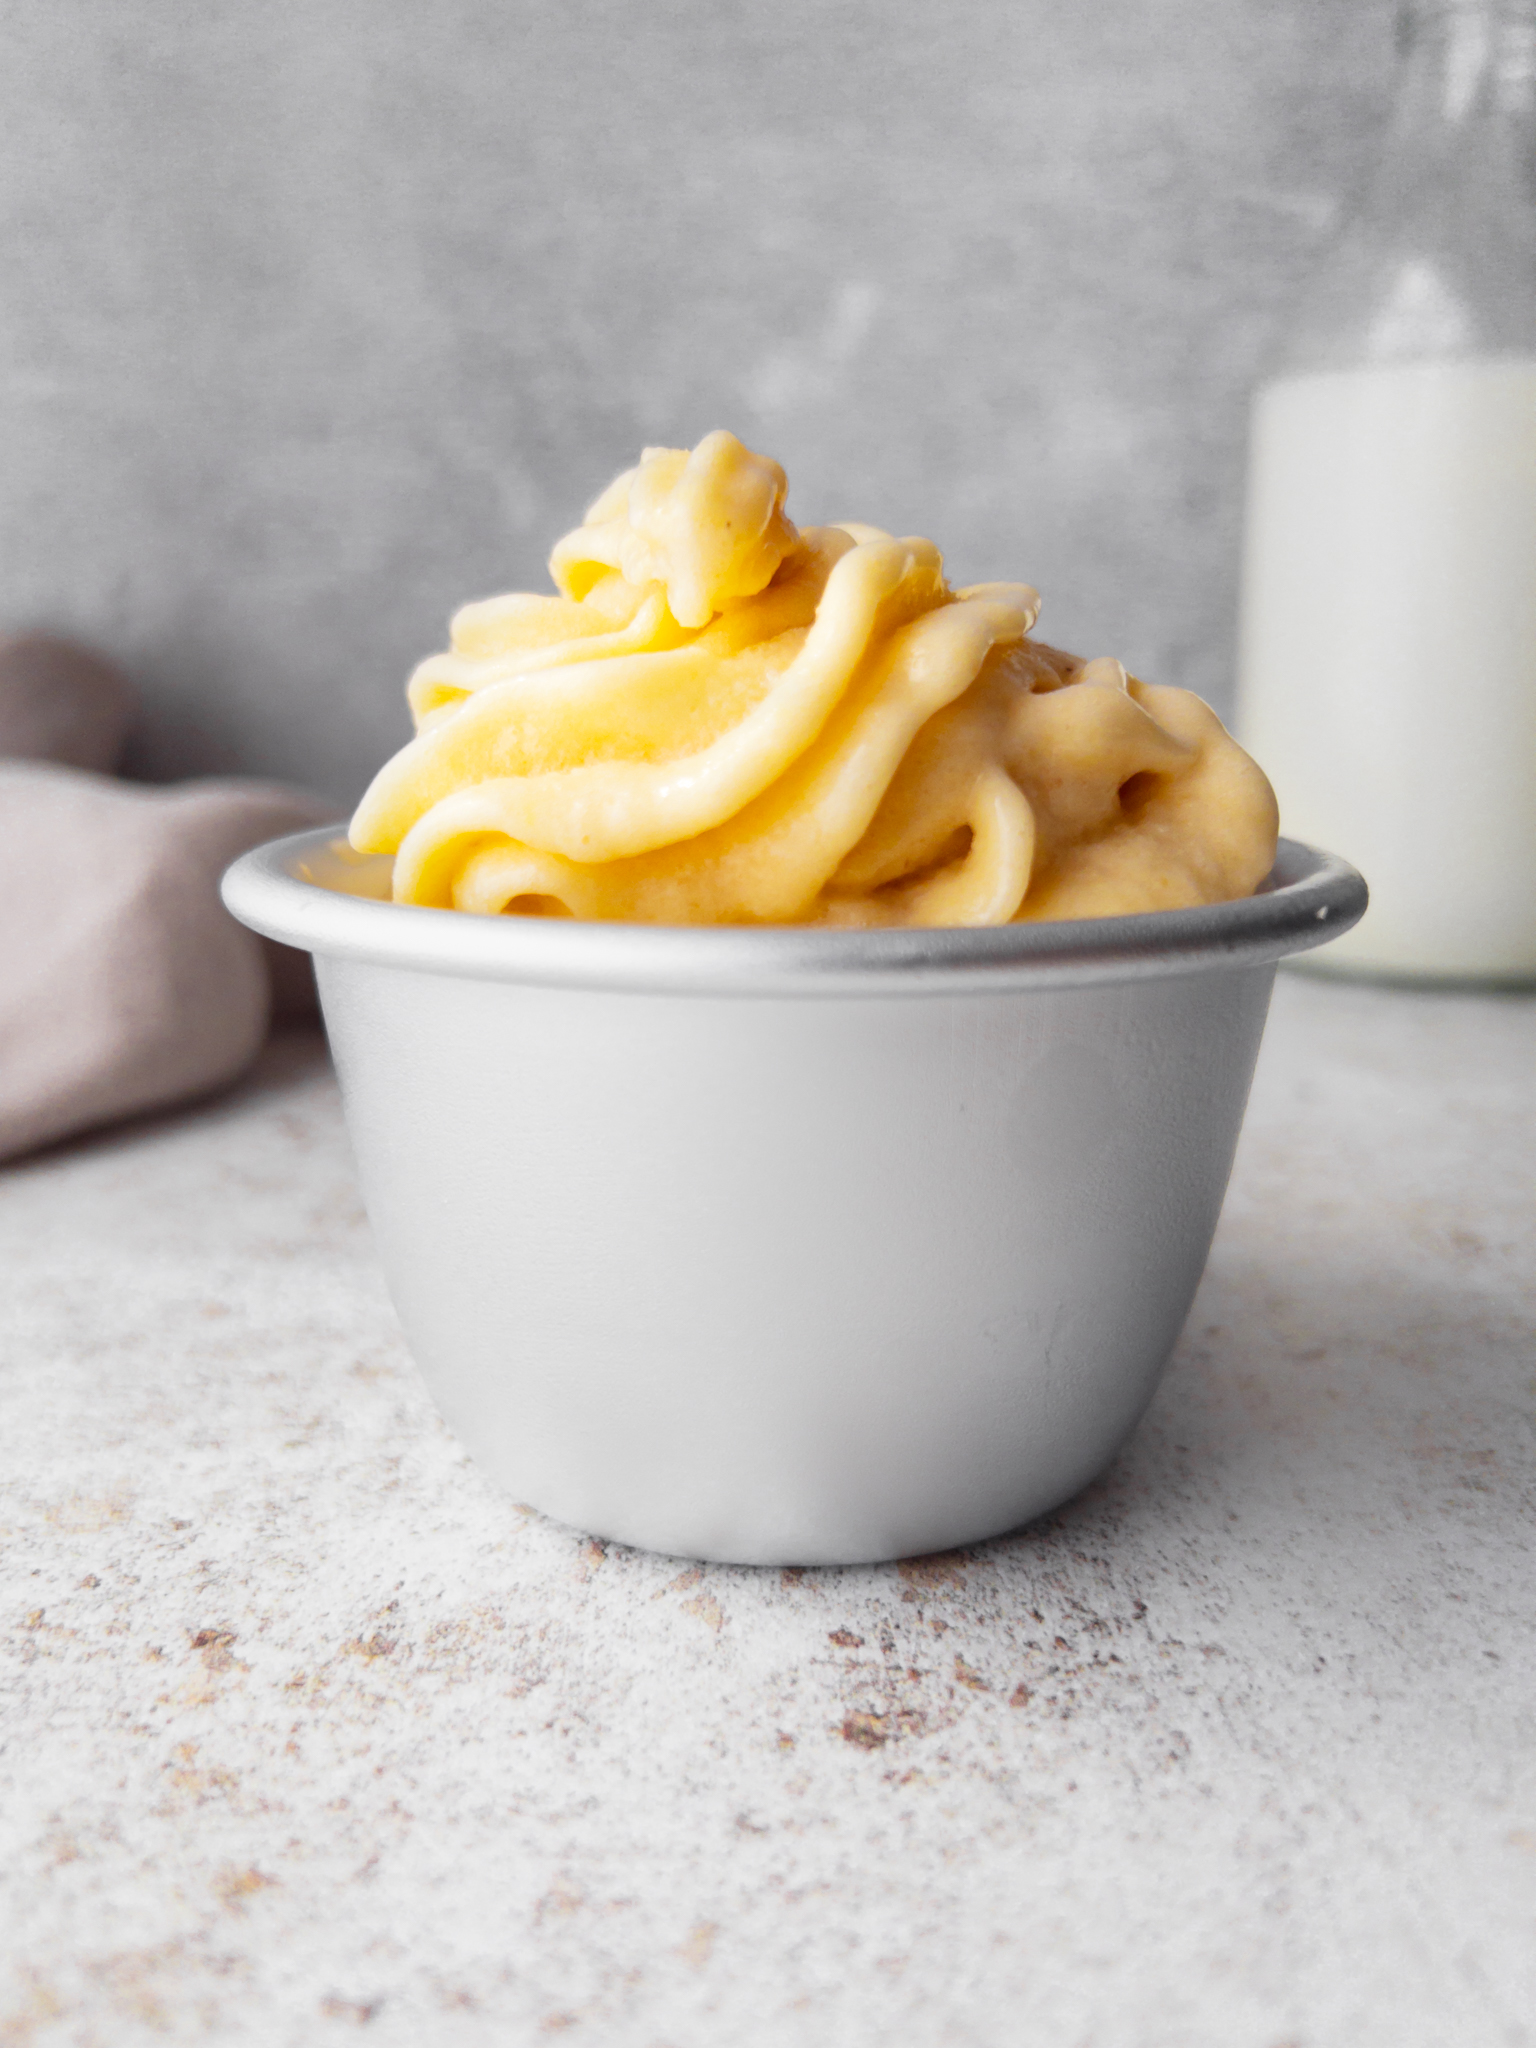 Tropical Soft Serve - suitable for baby weaning and toddlers